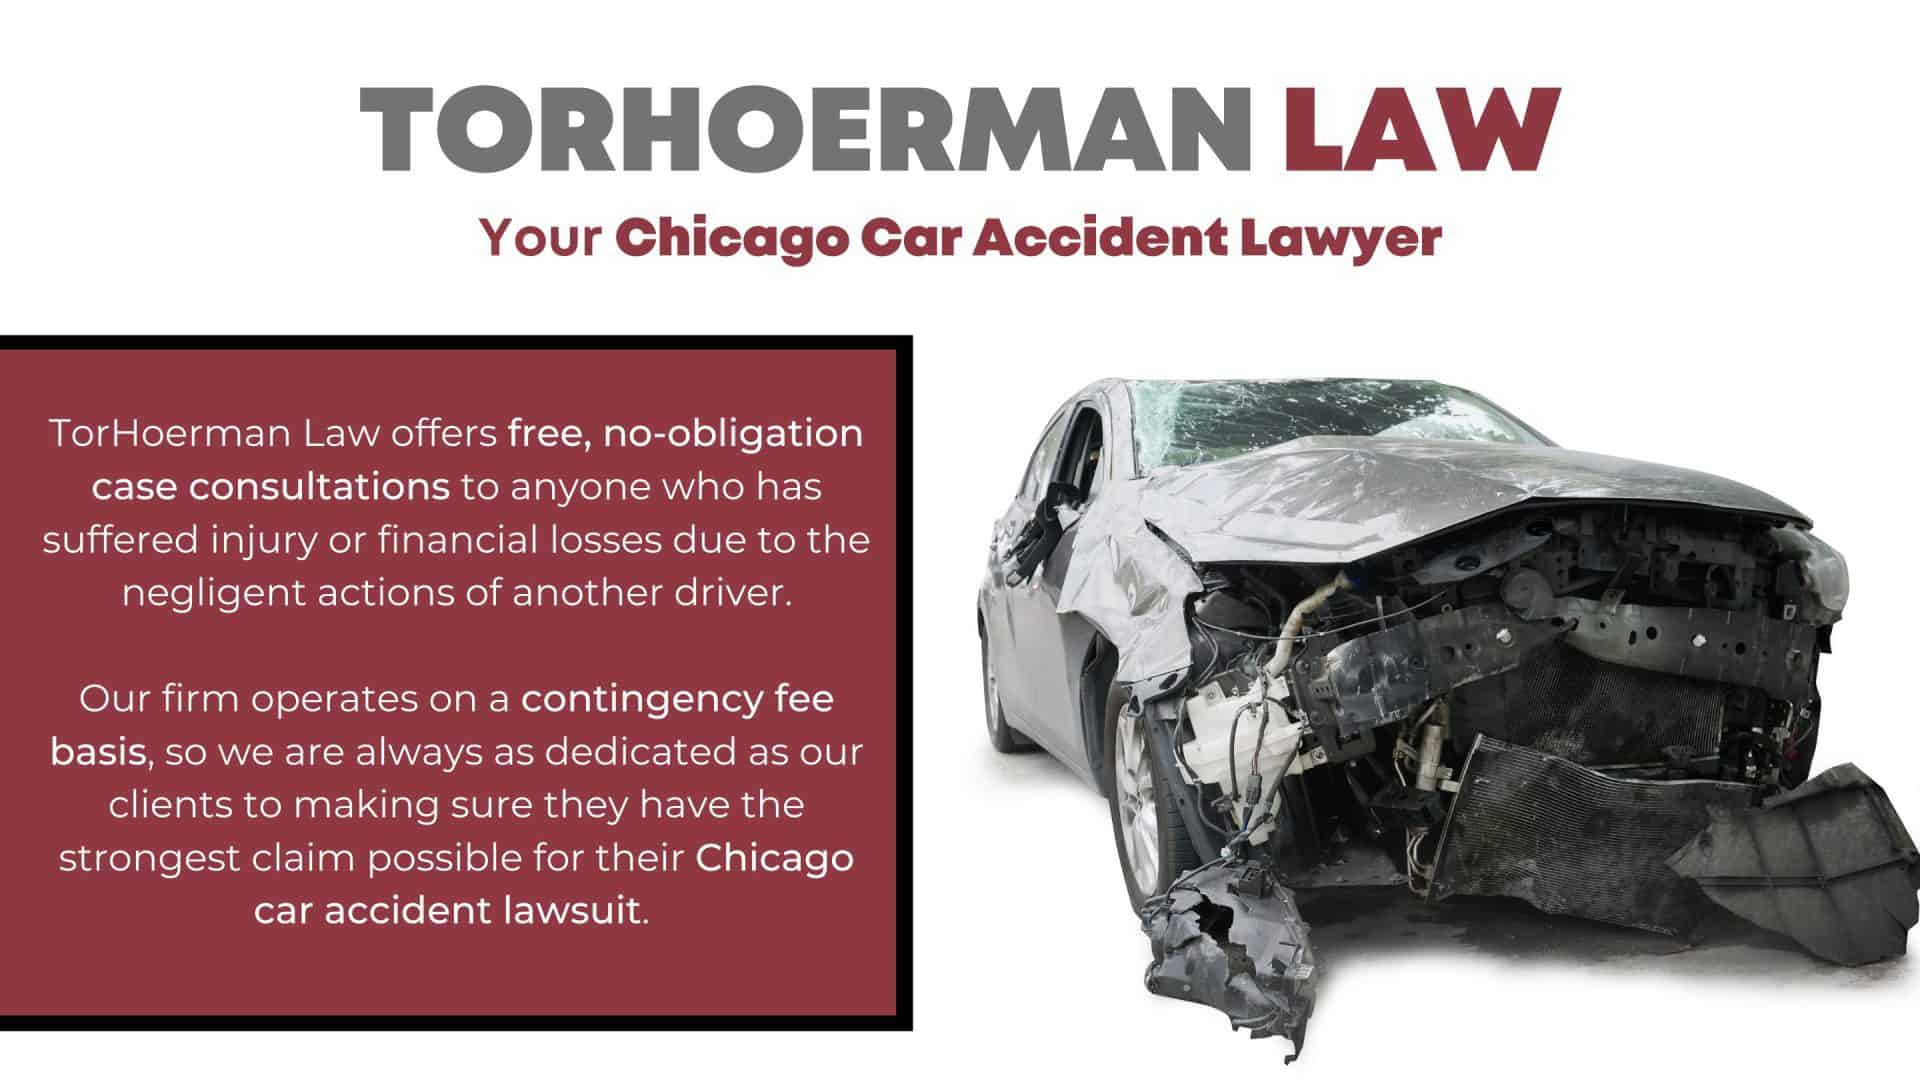 torhoerman law chicago car accident lawyer